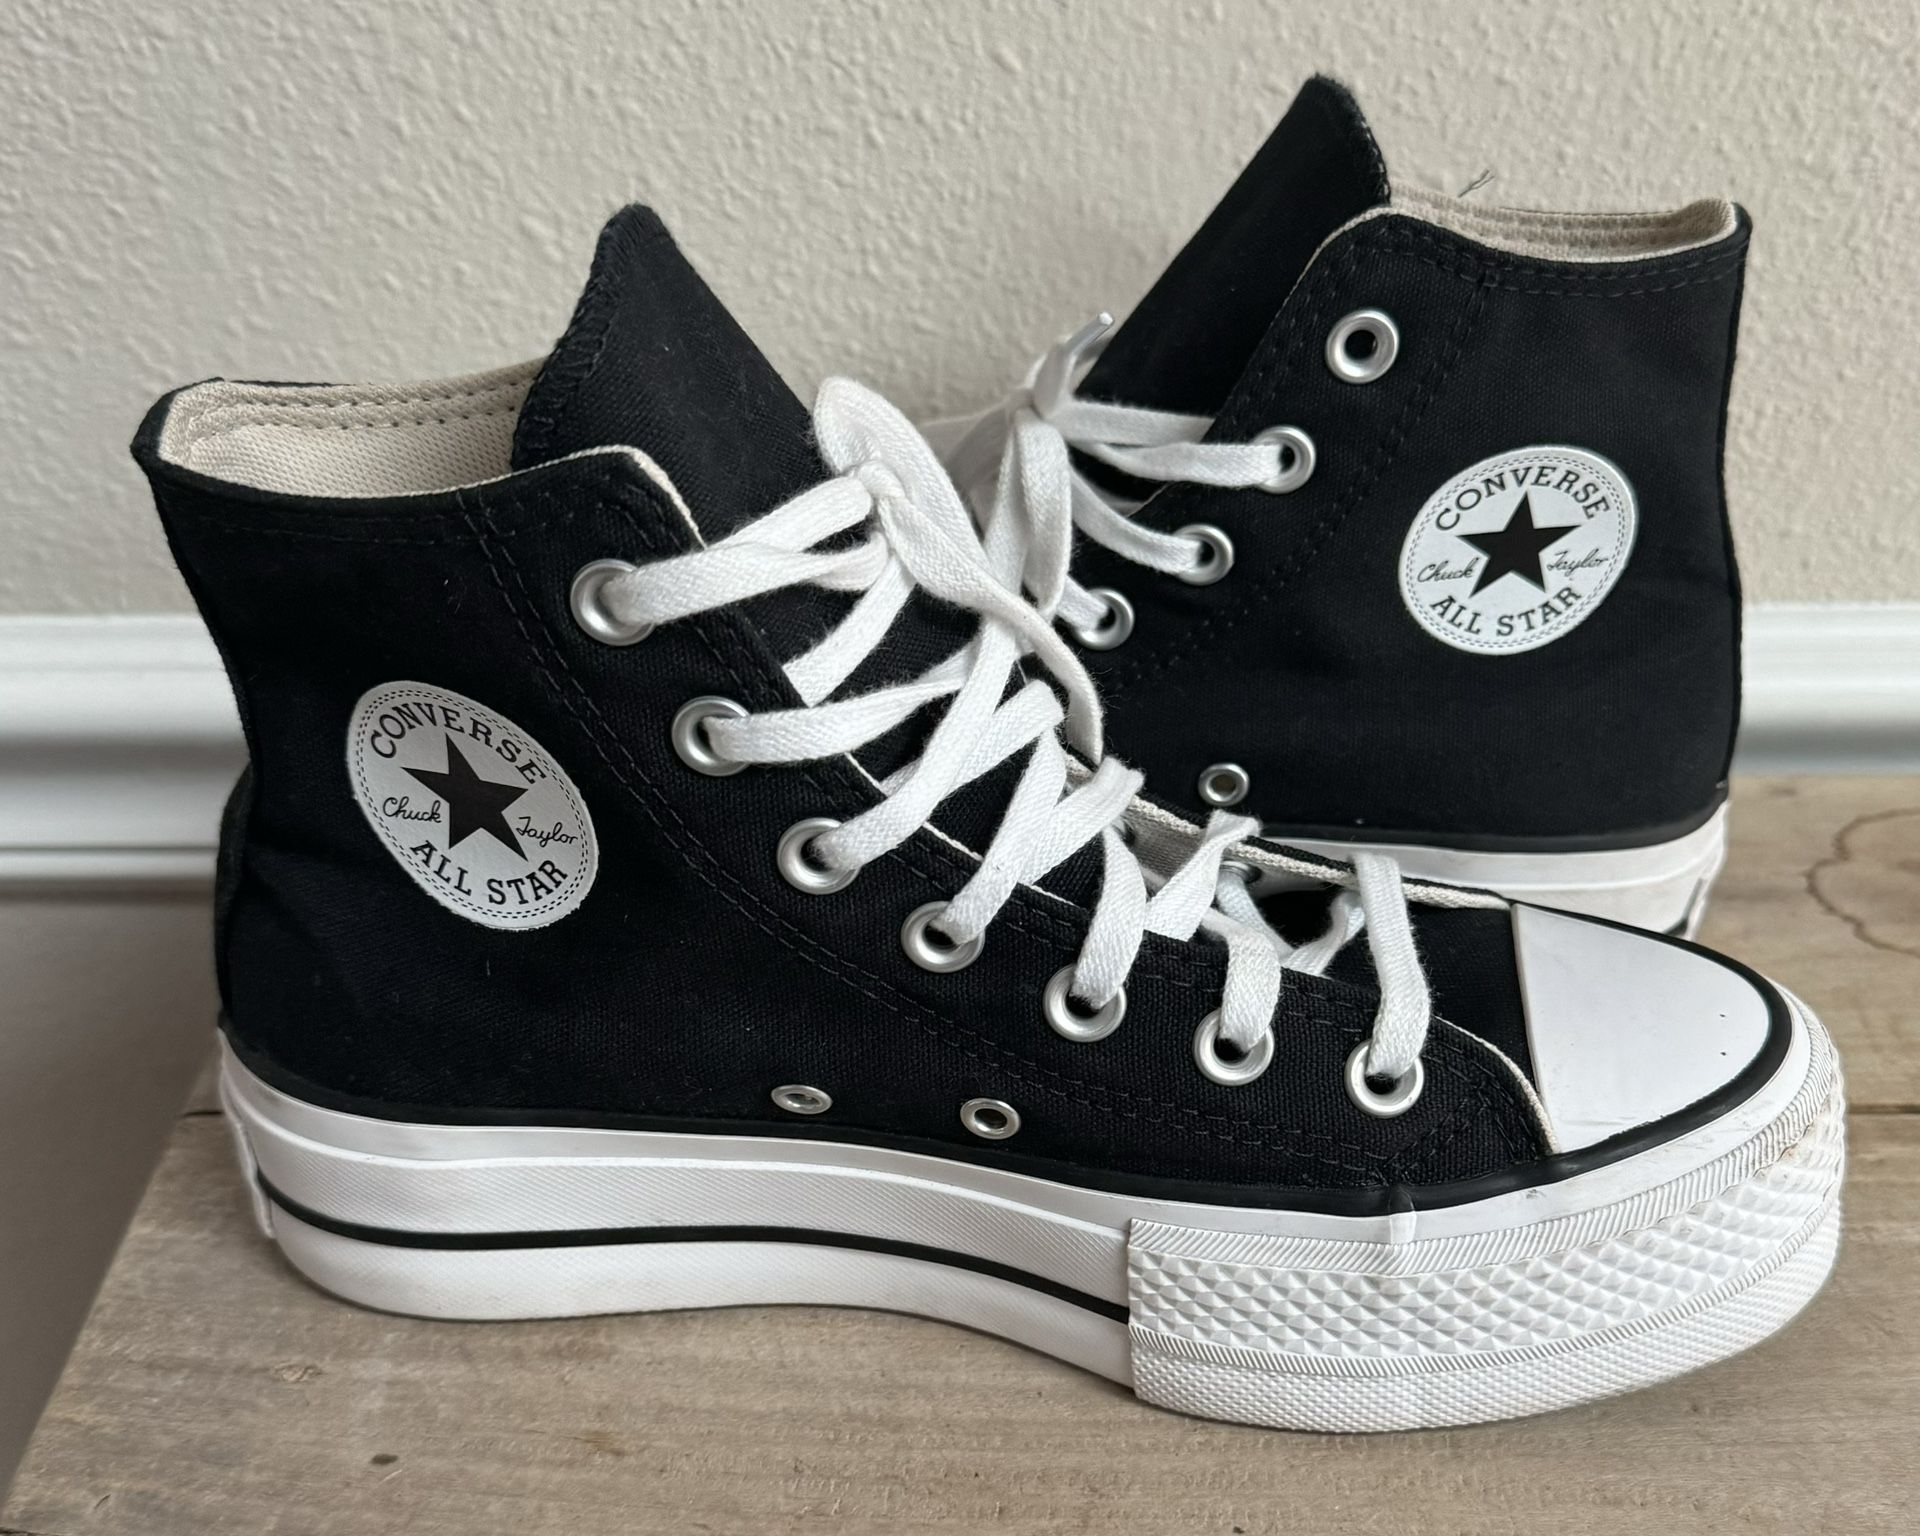 Converse Chuck Taylor High Tops Shoes All Star Womens Size 5 just $25 xox